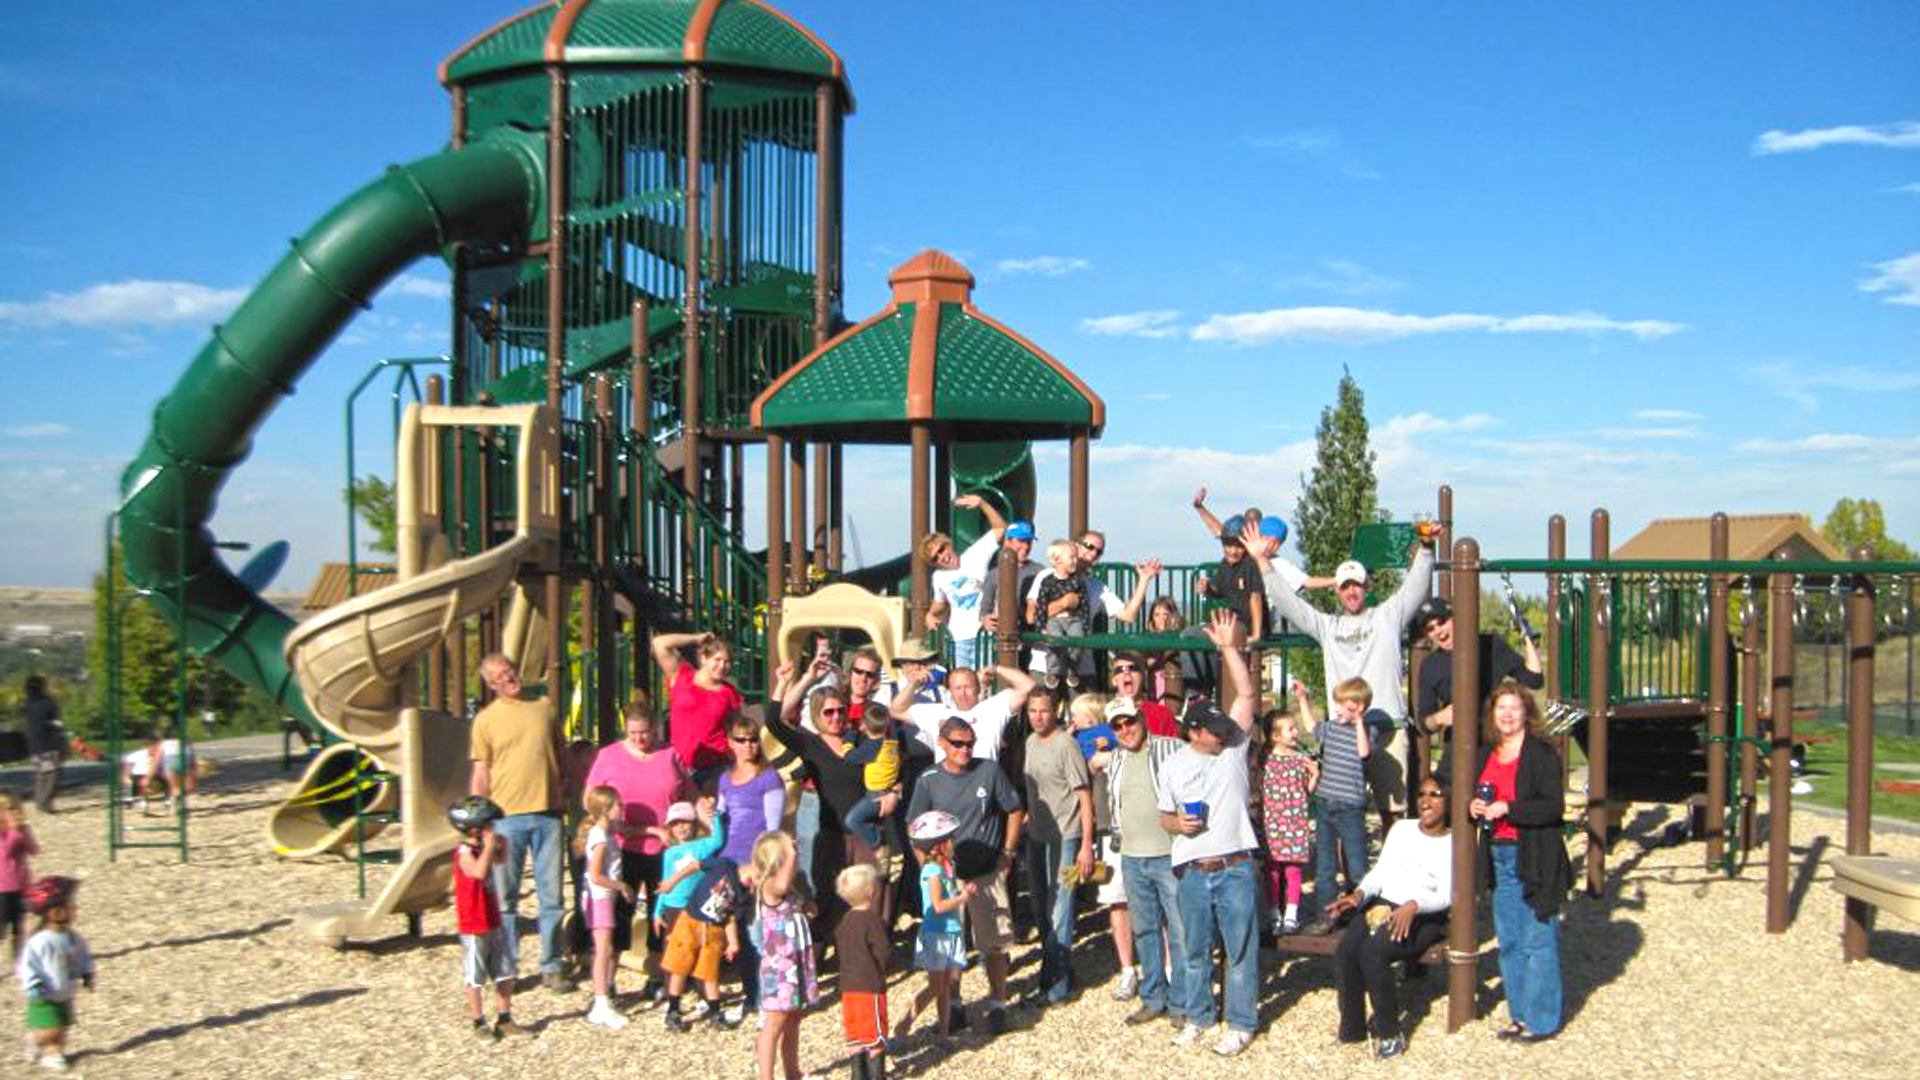 Group of residents at the playground in Estates Park.